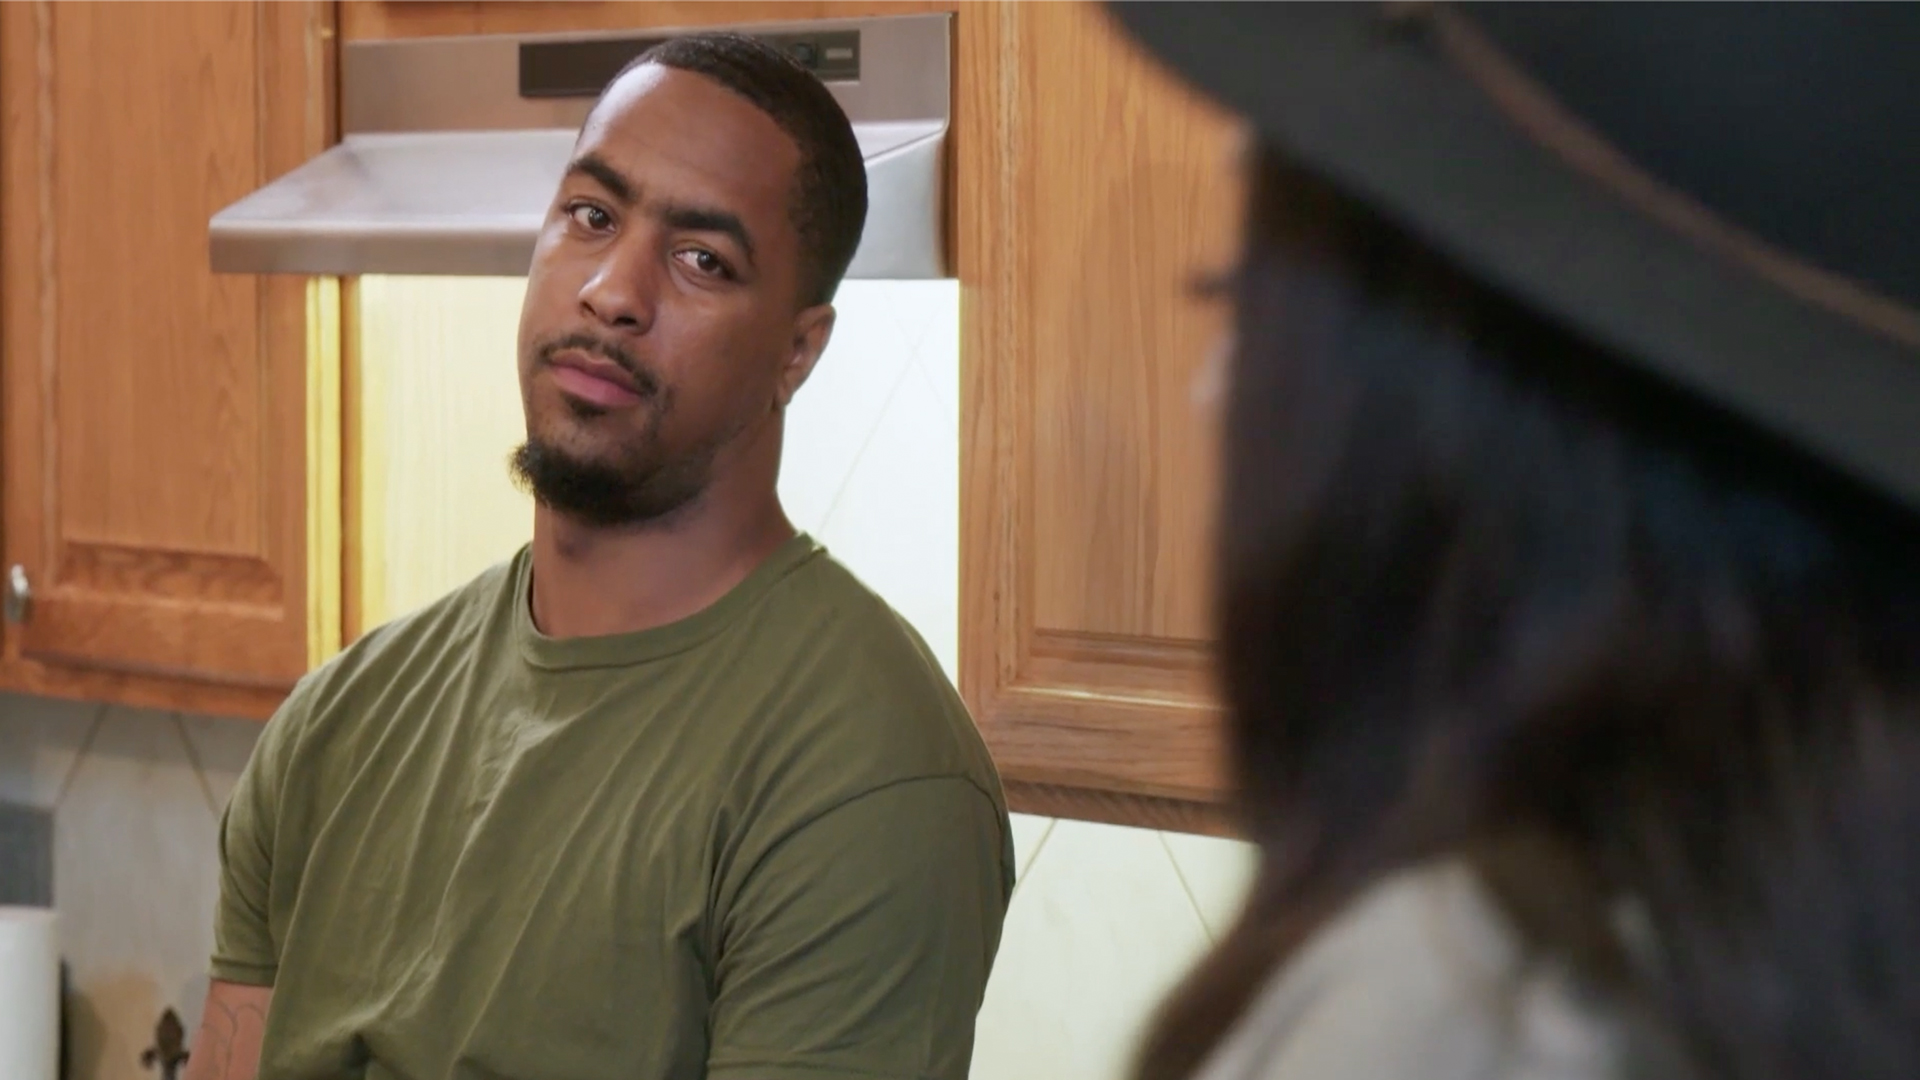 Watch Ray’s Low Paycheck Is Causing Stress! | Life After Lockup Video Extras